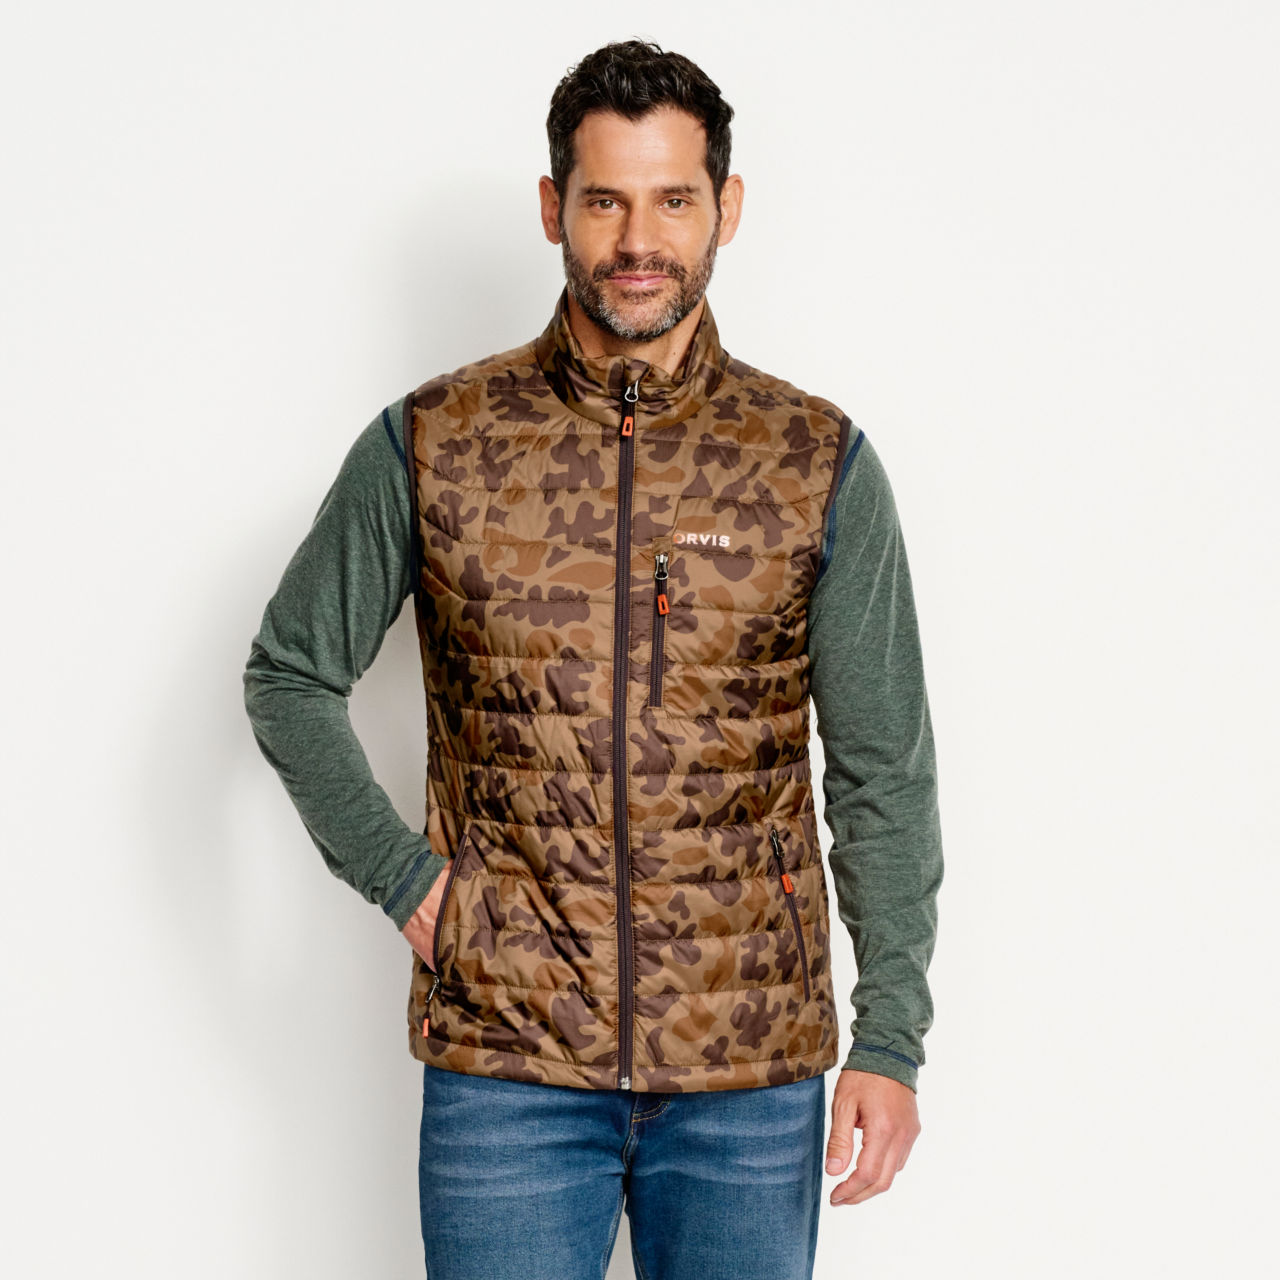 Recycled Drift Vest - ORVIS 1971 CAMO image number 2